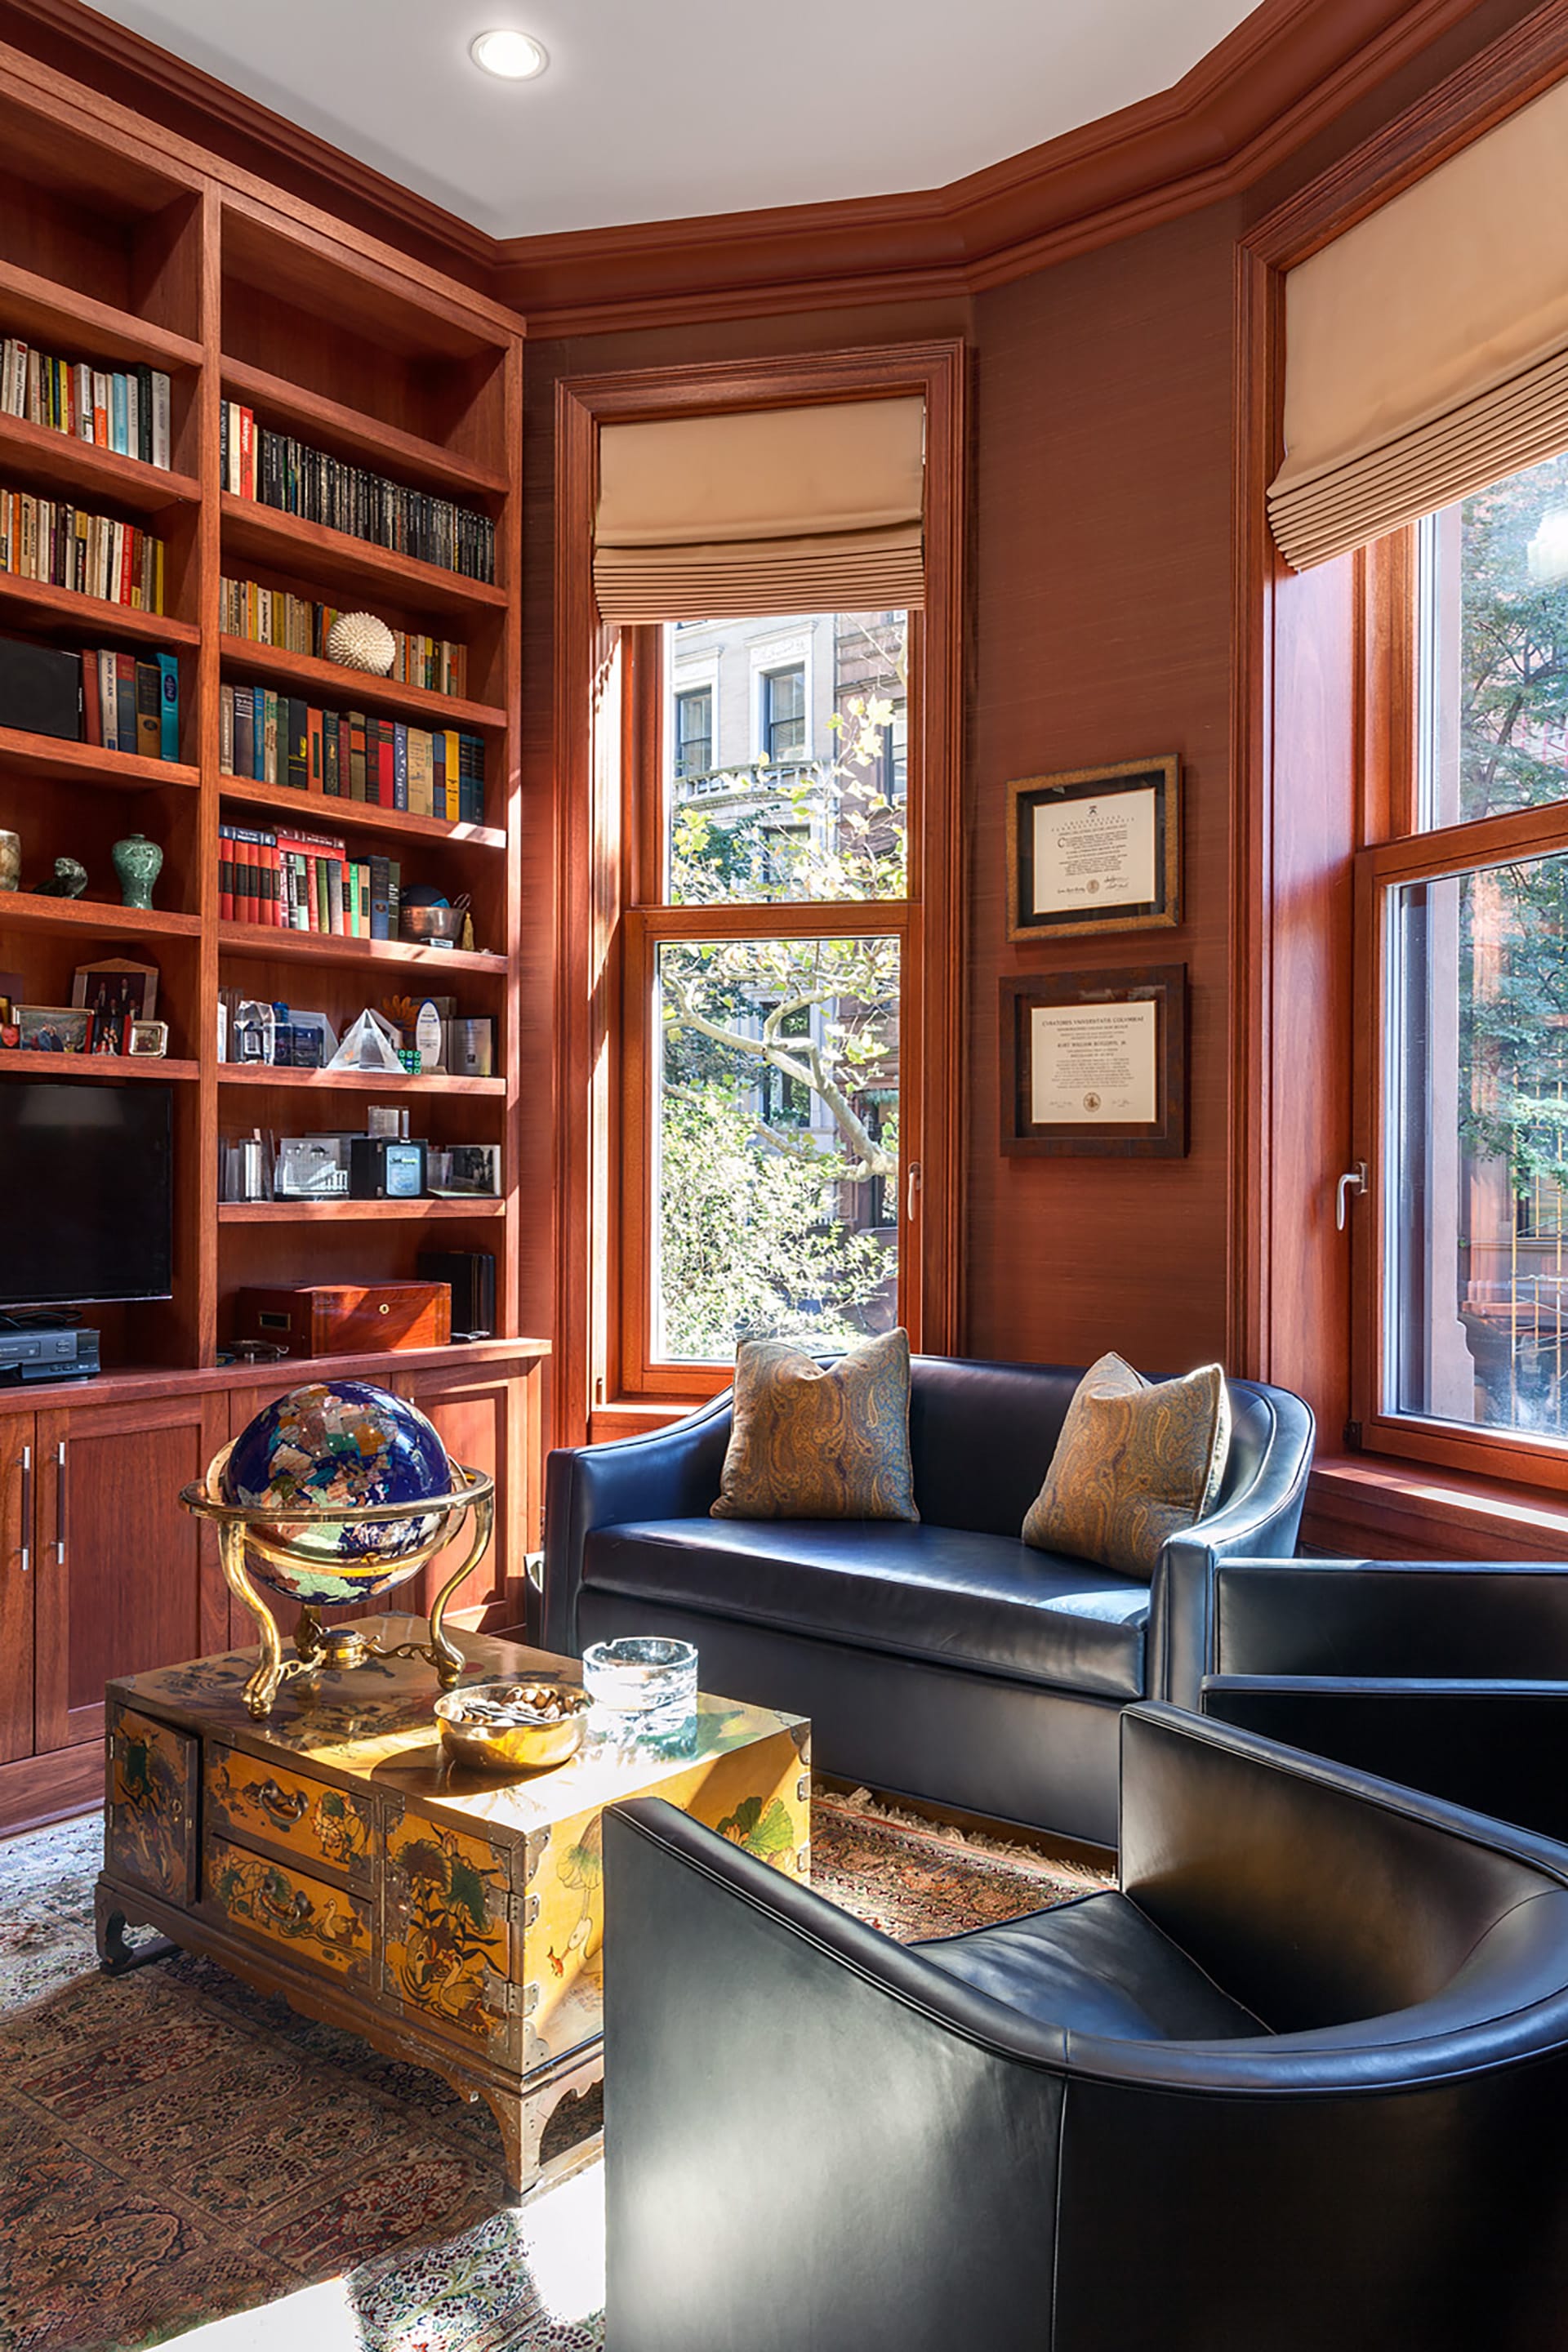 Wood-paneled study with roman shades and built-in bookshelves at the front of an Upper West Side townhouse.